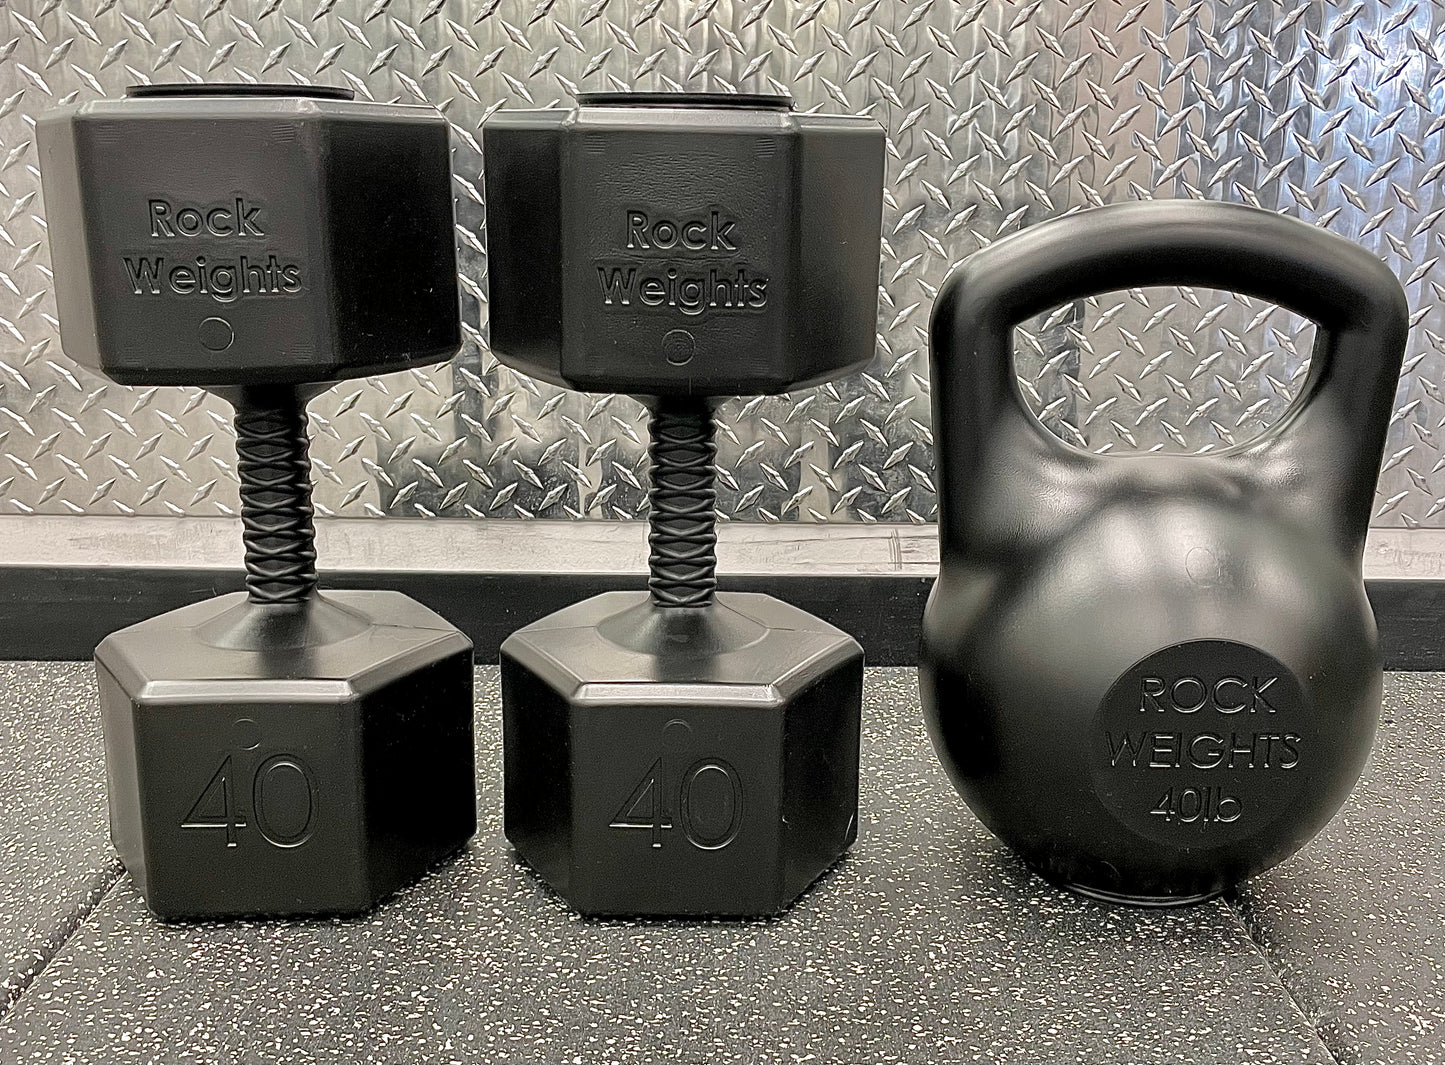 The 40 lb BUNDLE! (2 Dumbbells, 1 Kettlebell and Grip Tape)